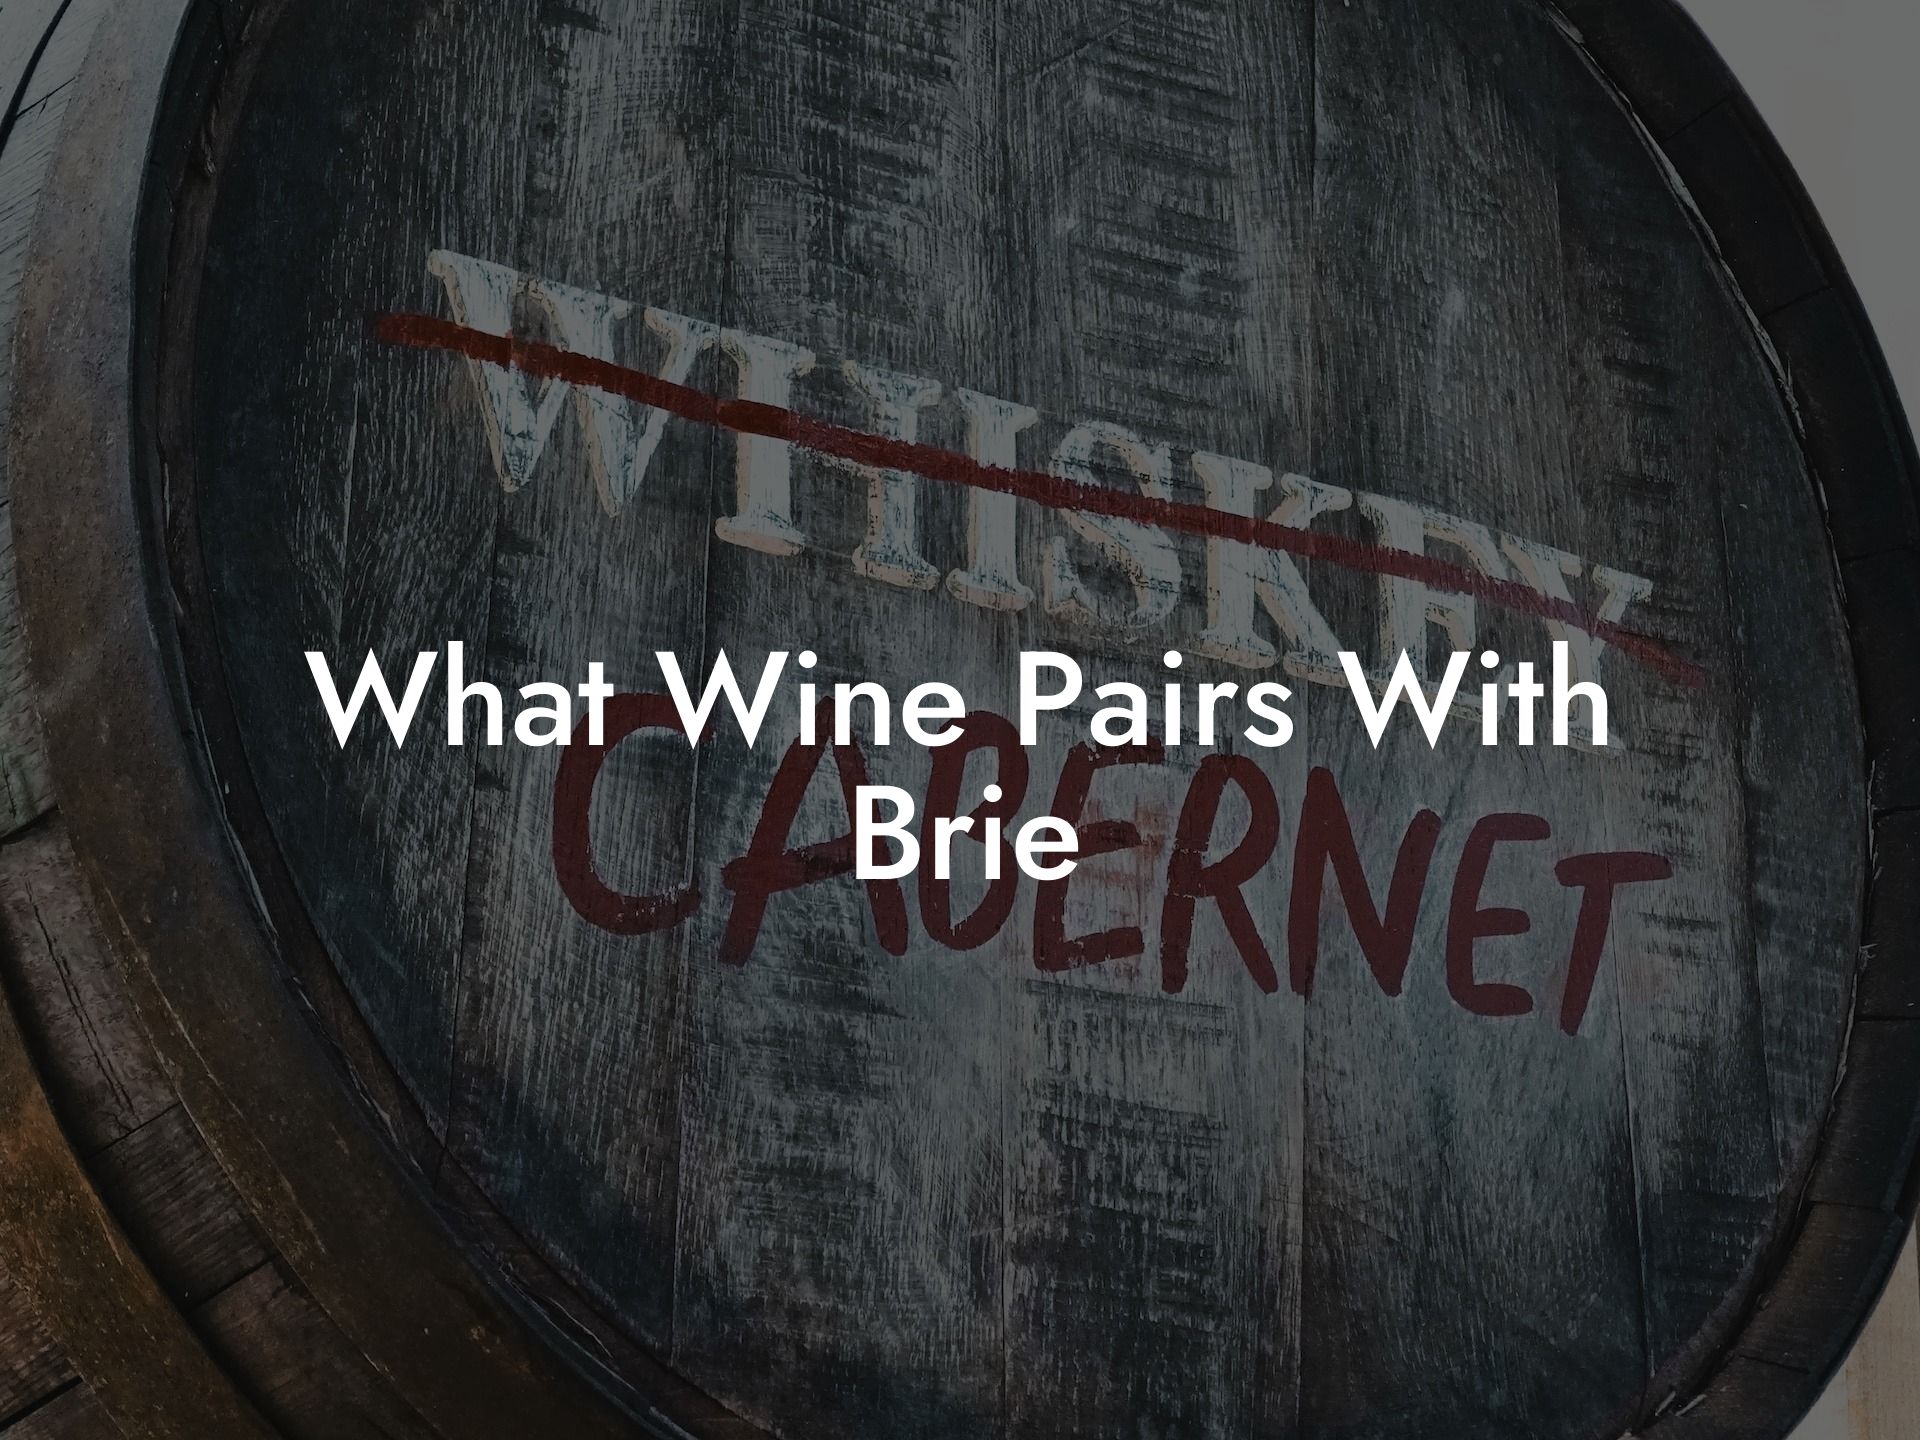 What Wine Pairs With Brie